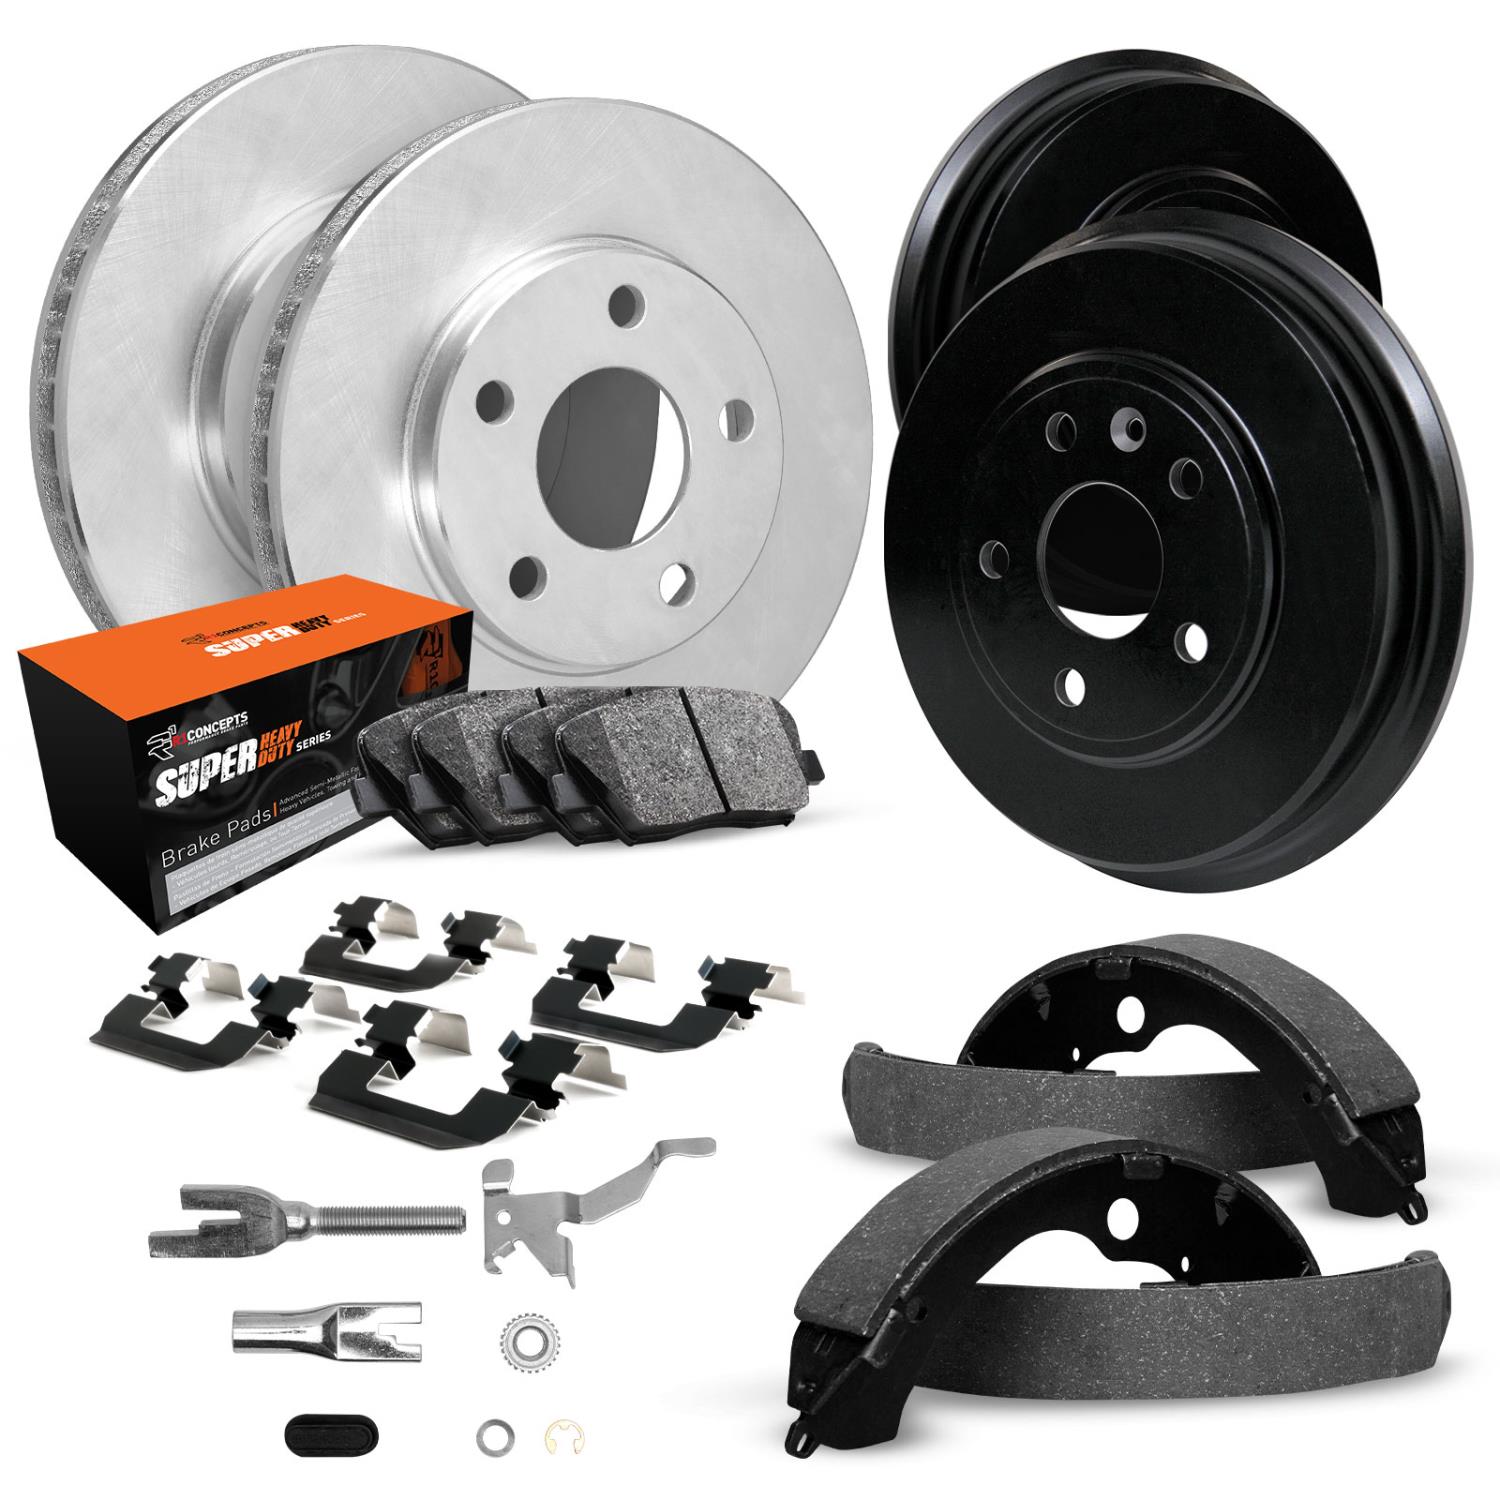 E-Line Blank Brake Rotor & Drum Set w/Super-Duty Pads, Shoes, Hardware, & Adjusters, 1973-1973 Ford/Lincoln/Mercury/Mazda